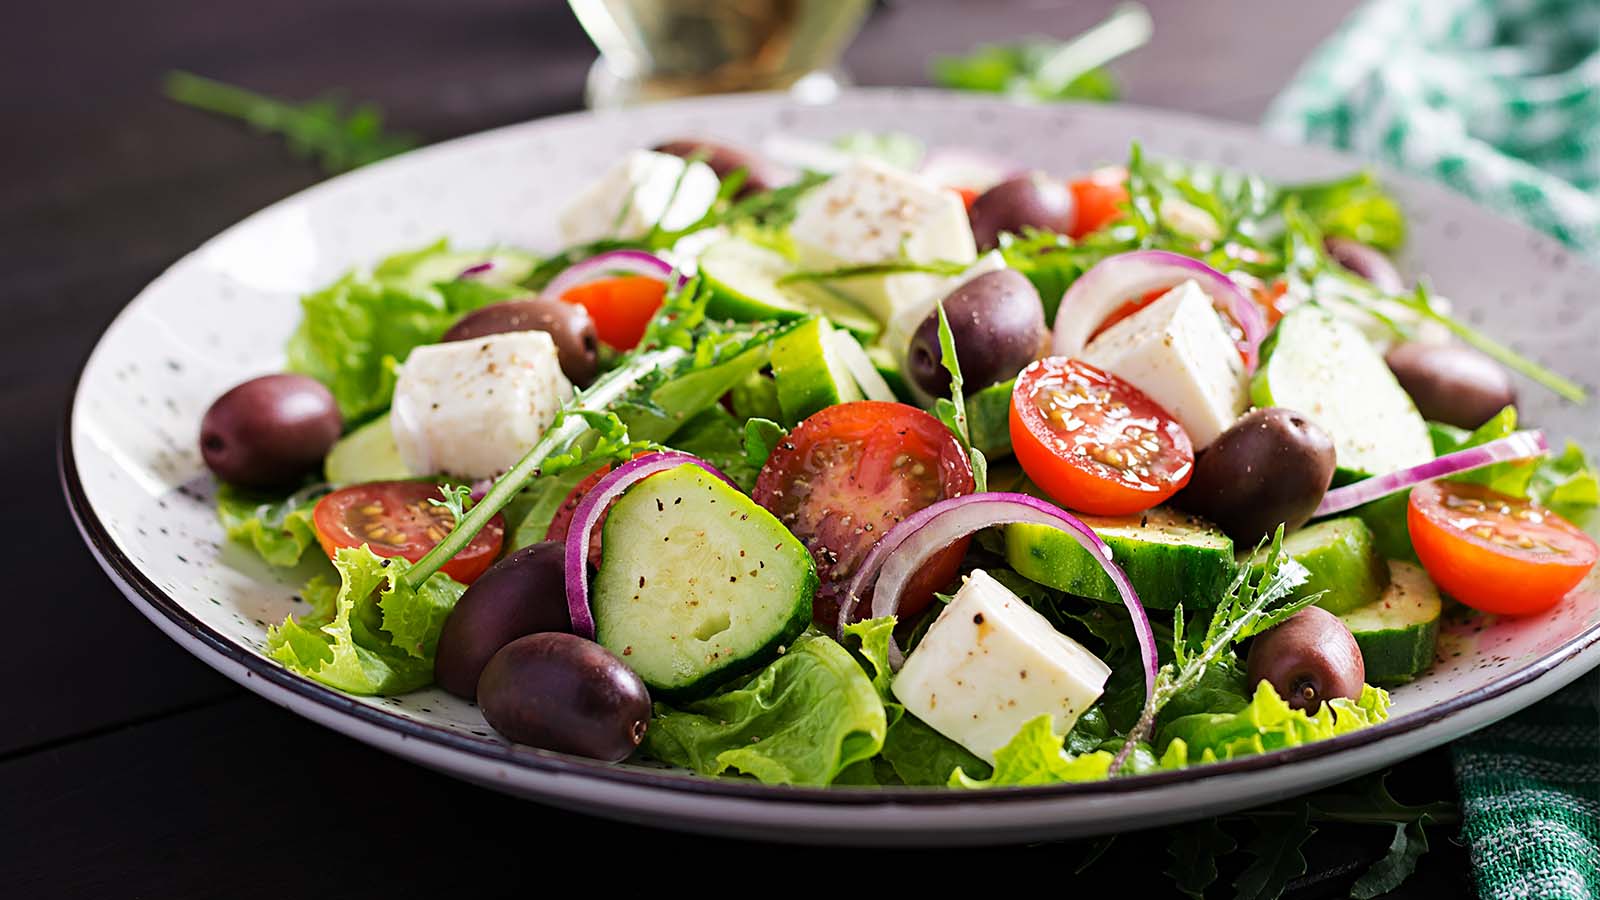 Greek salad with feta cheese on white plate